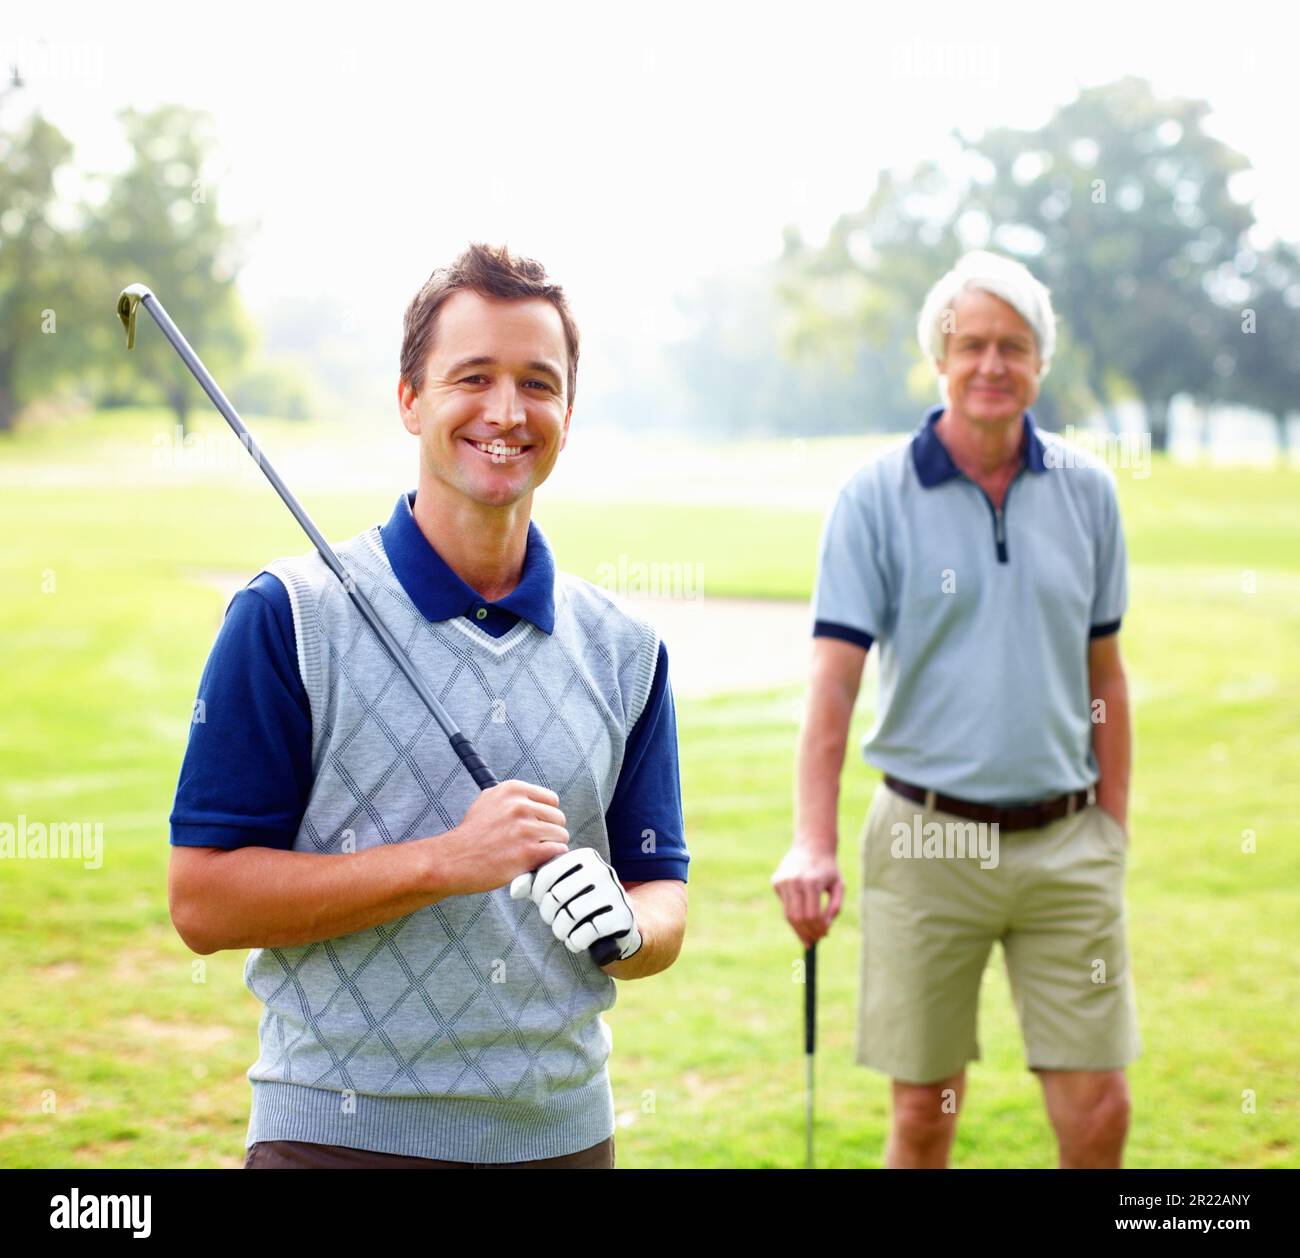 Smart golfer smiling. Portrait of smart man holding a golf club and smiling with father standing in background. Stock Photo